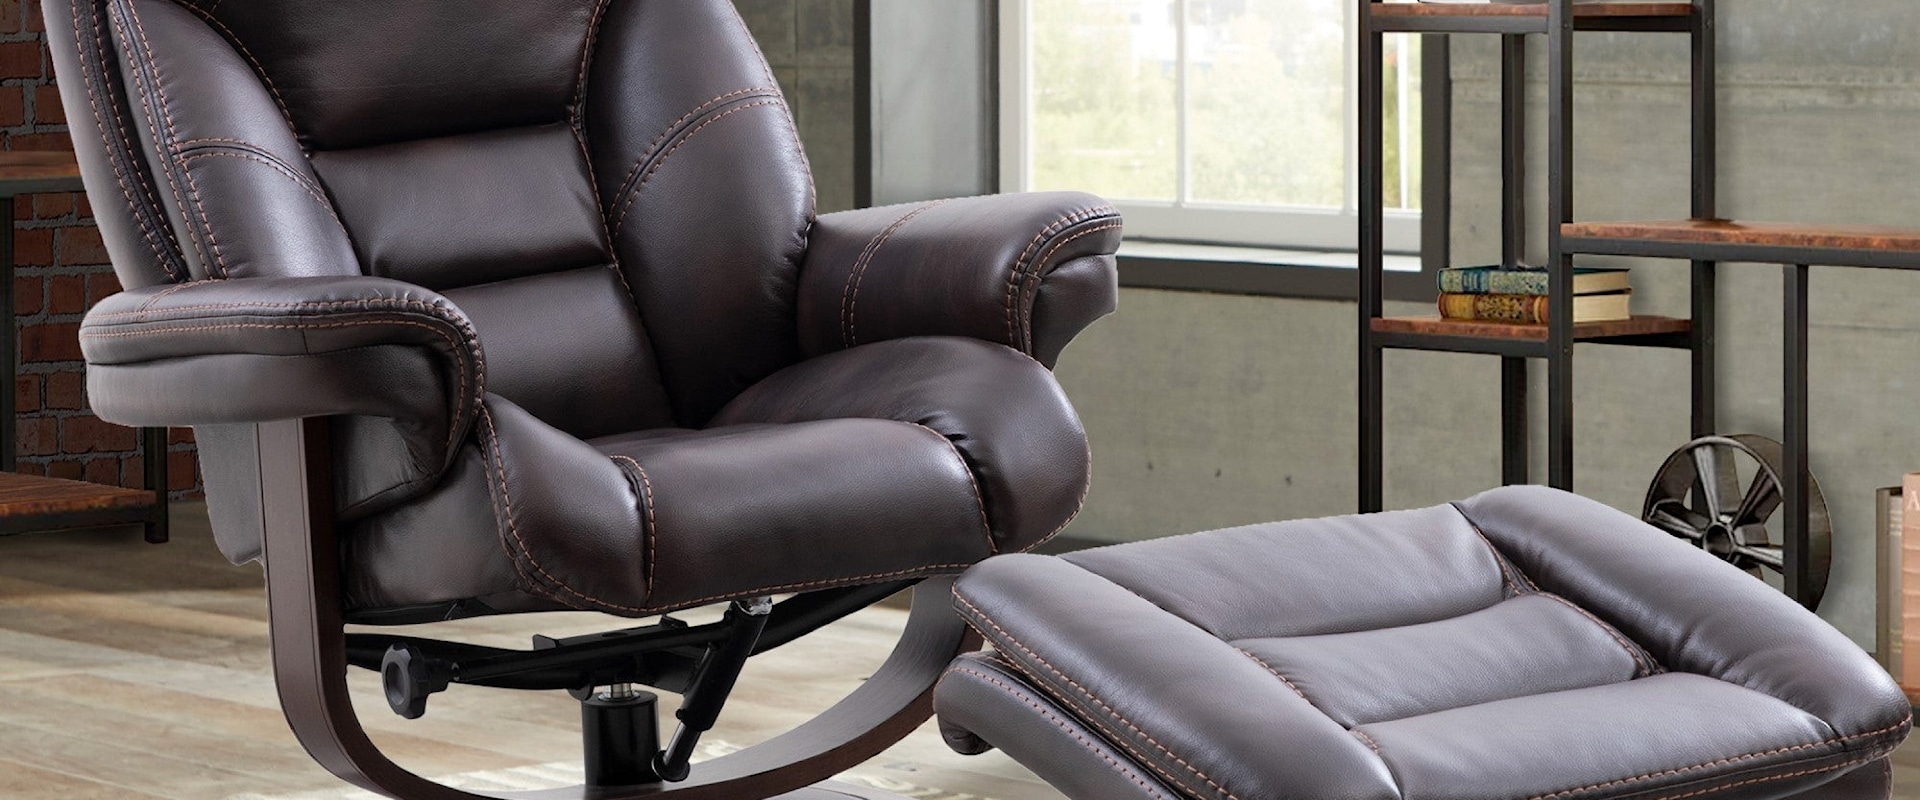 Contemporary Manual Reclining Swivel Chair and Ottoman